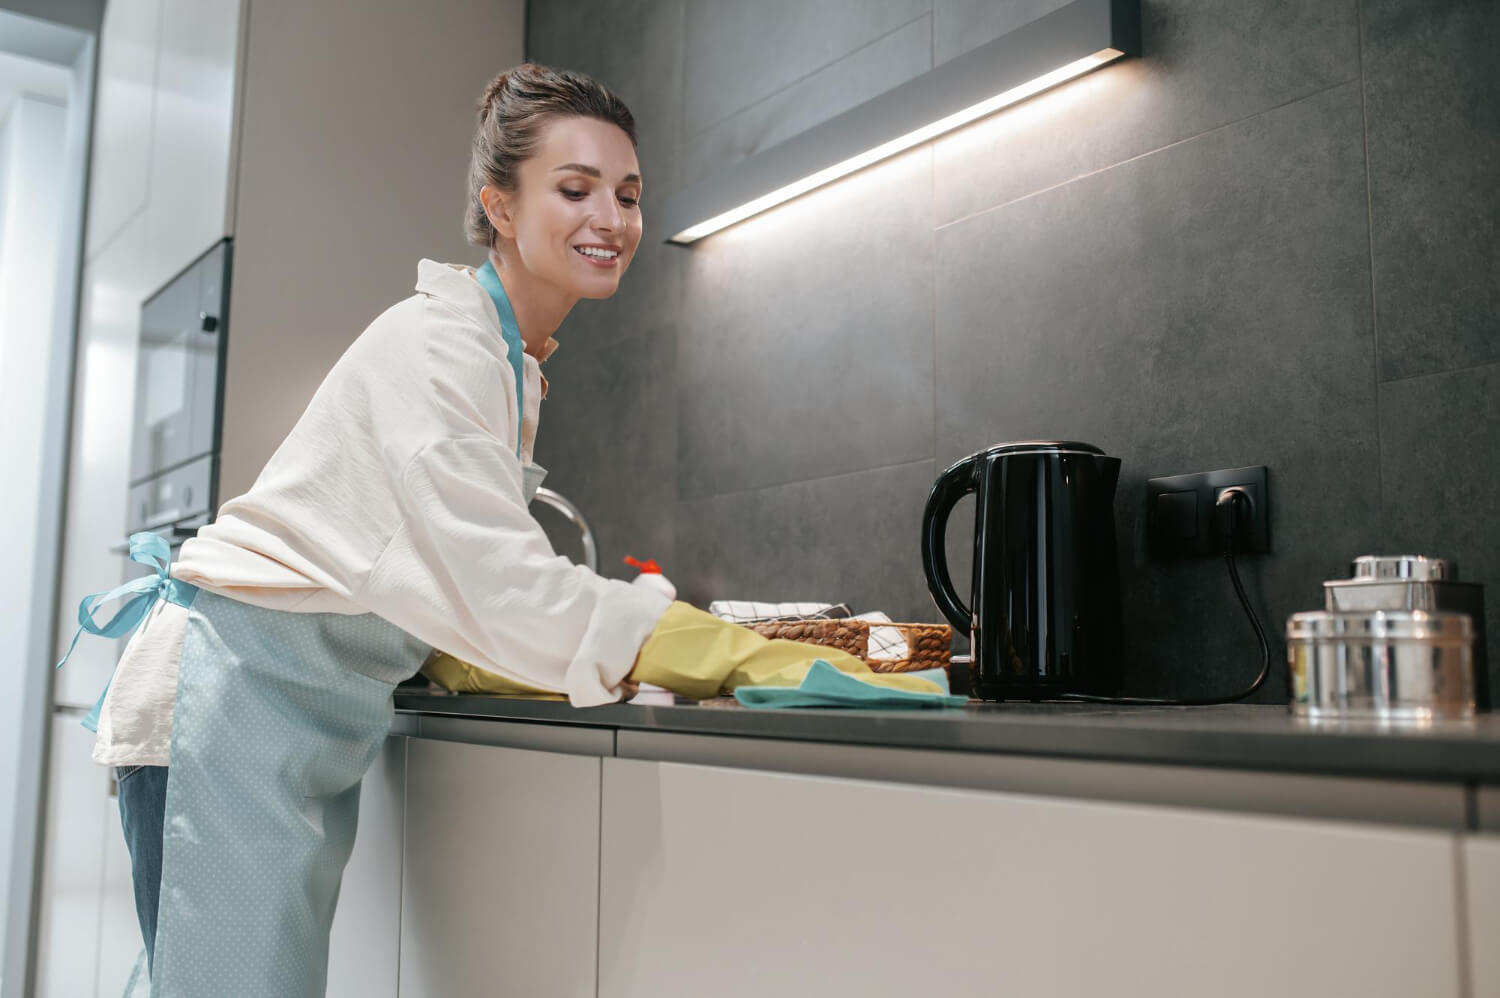 yoyng dark haired woman in yellow gloves cleaning kitchen surface with blue cloth